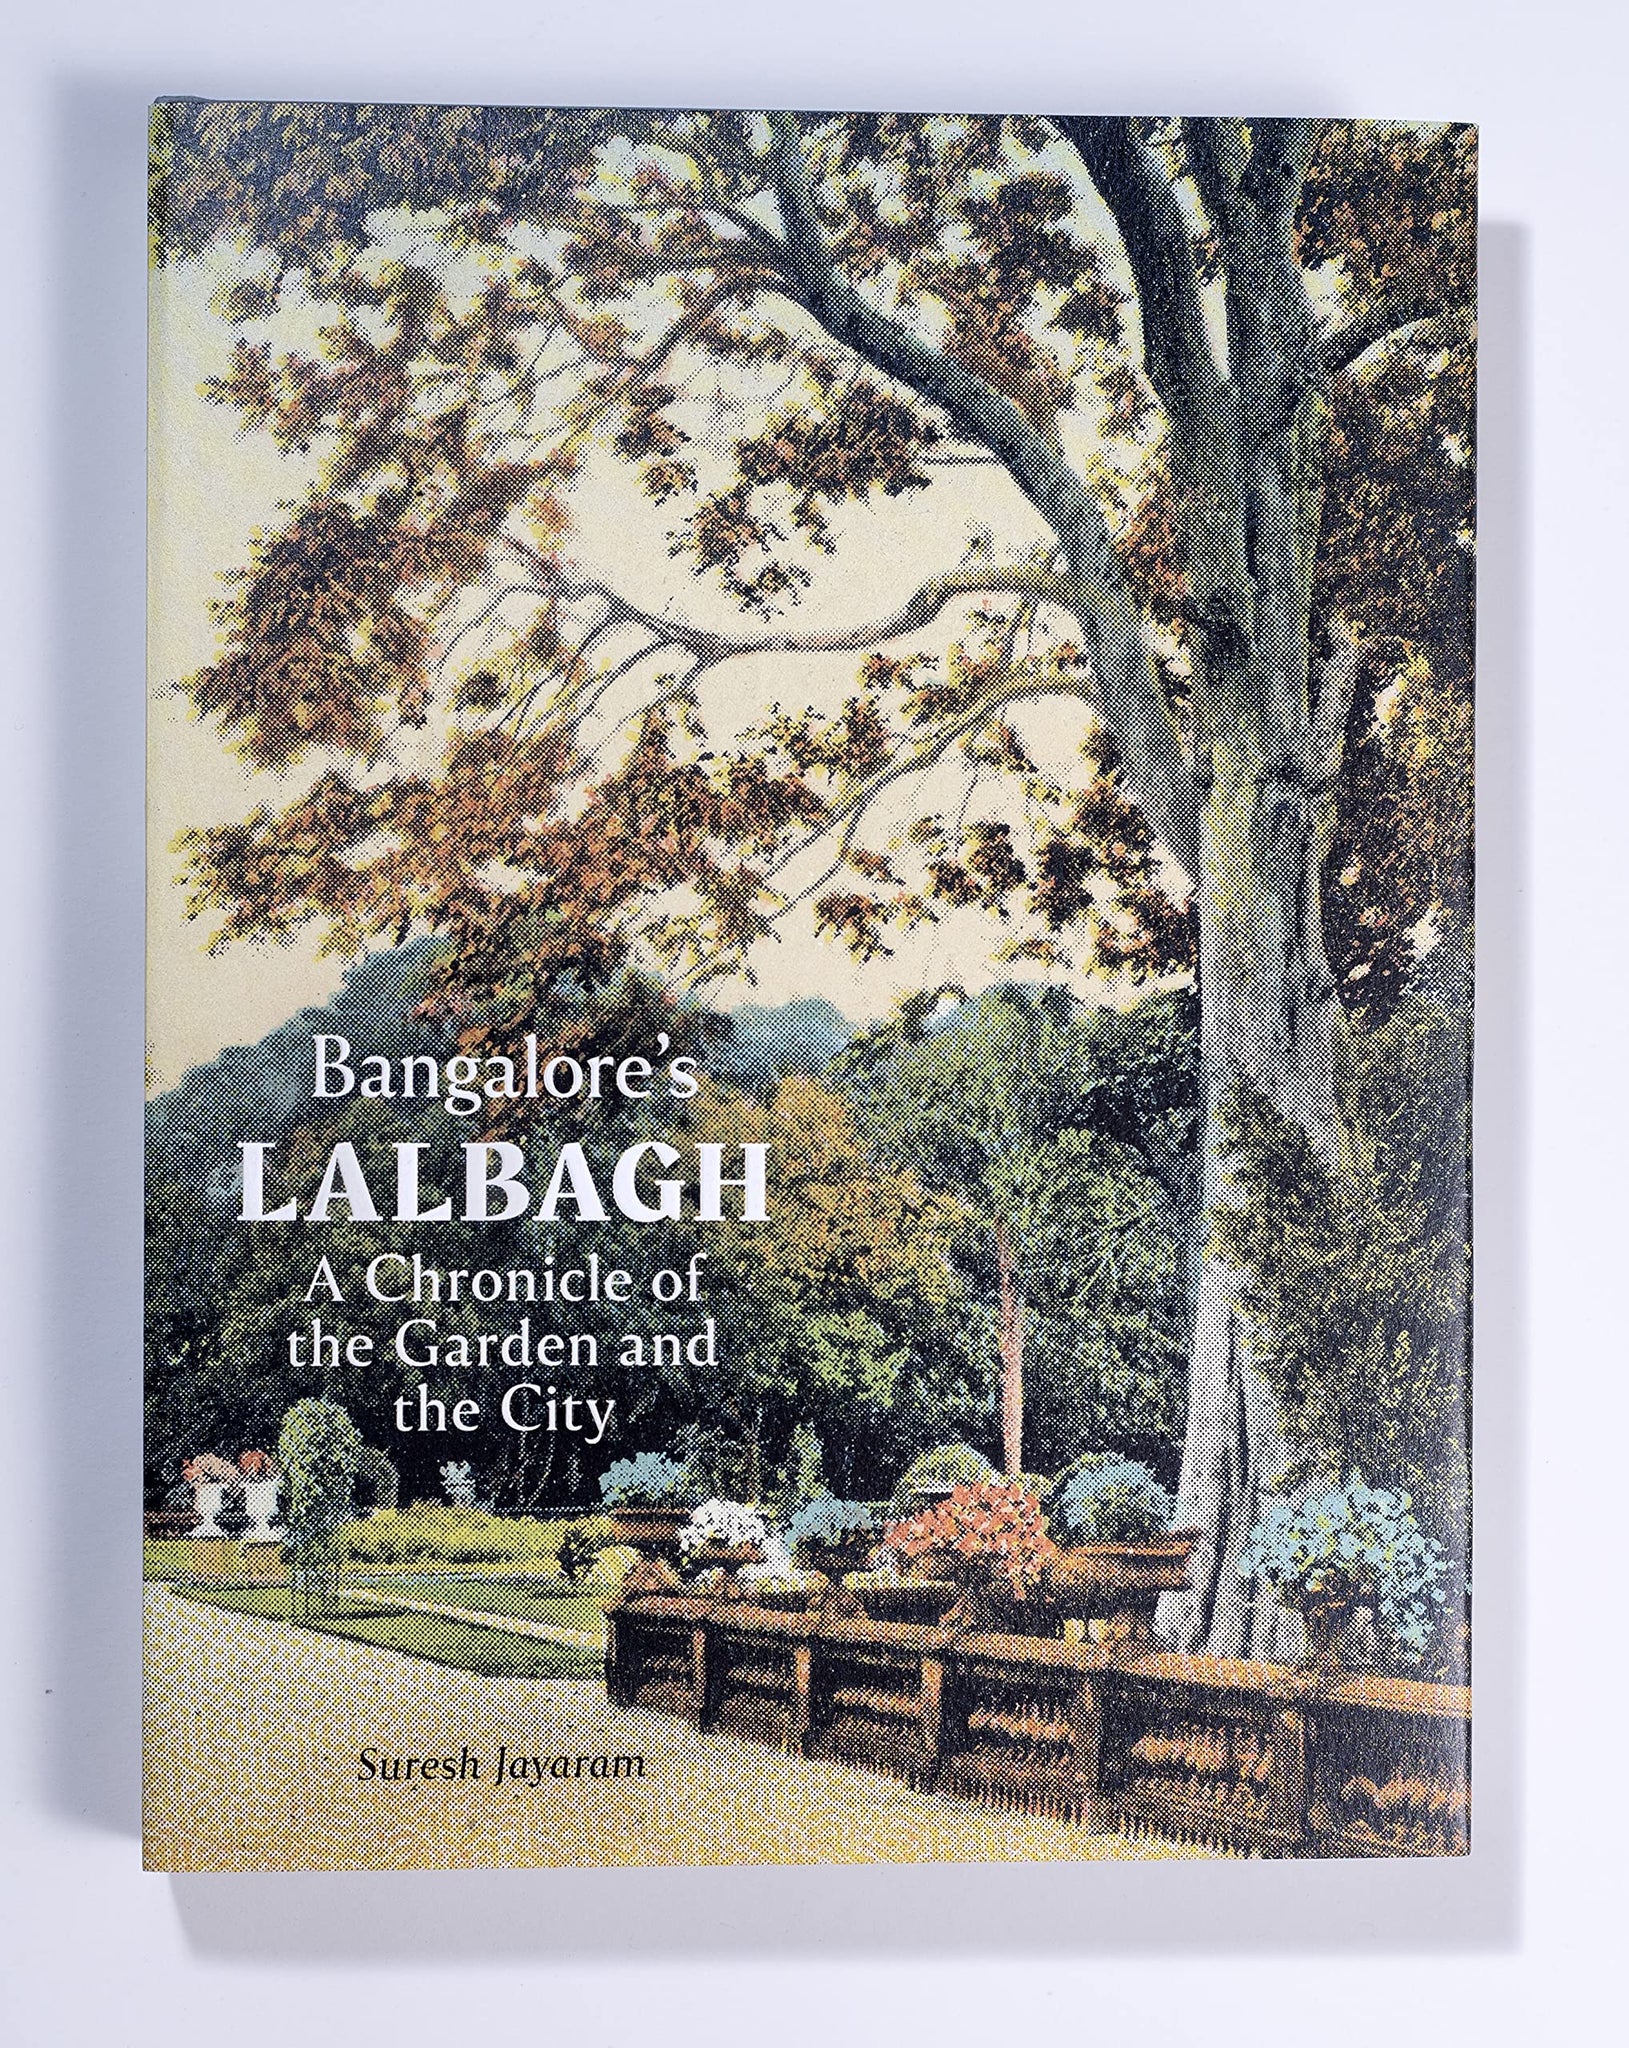 Bangalore's　–　Bookstore,　The　Lalbagh:　And　The　Library　A　City　Chronicle　Cafe　Of　Garden　Champaca　and